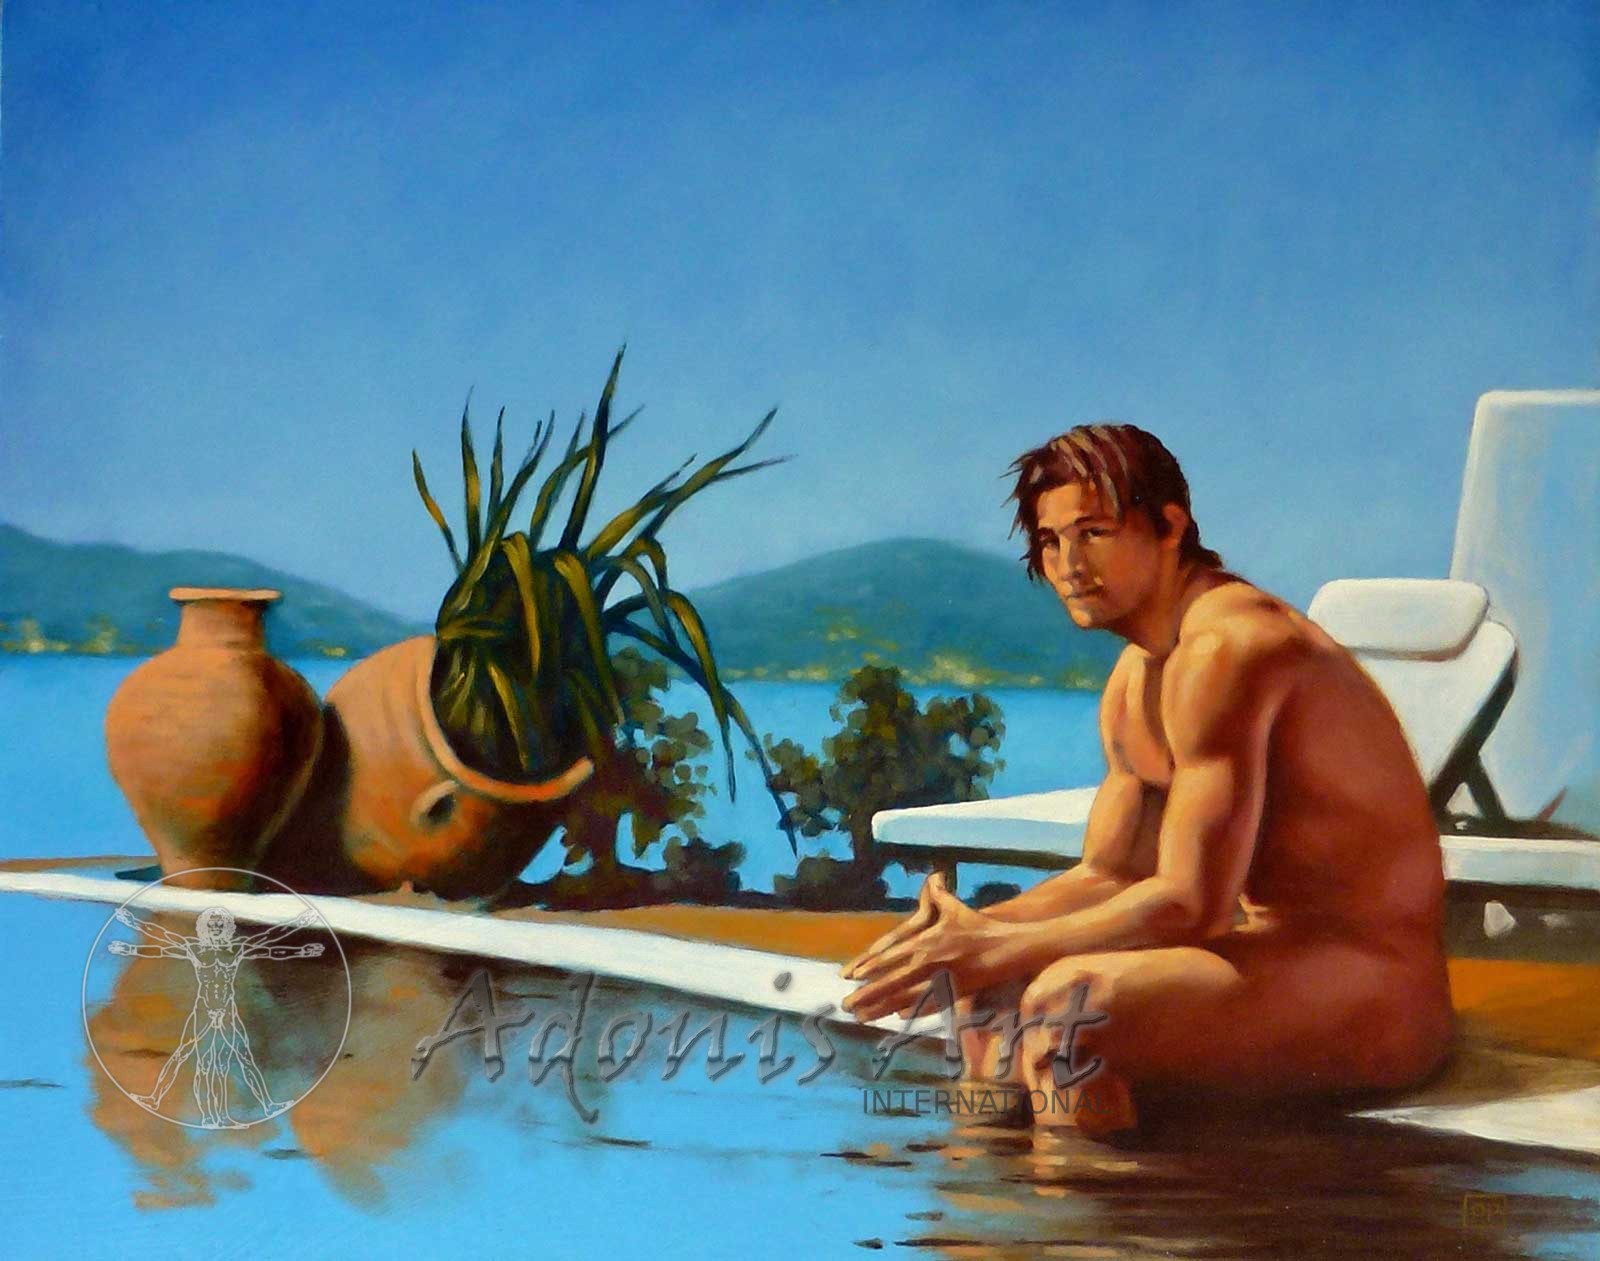 'The Infinity Pool' by Andrew Potter